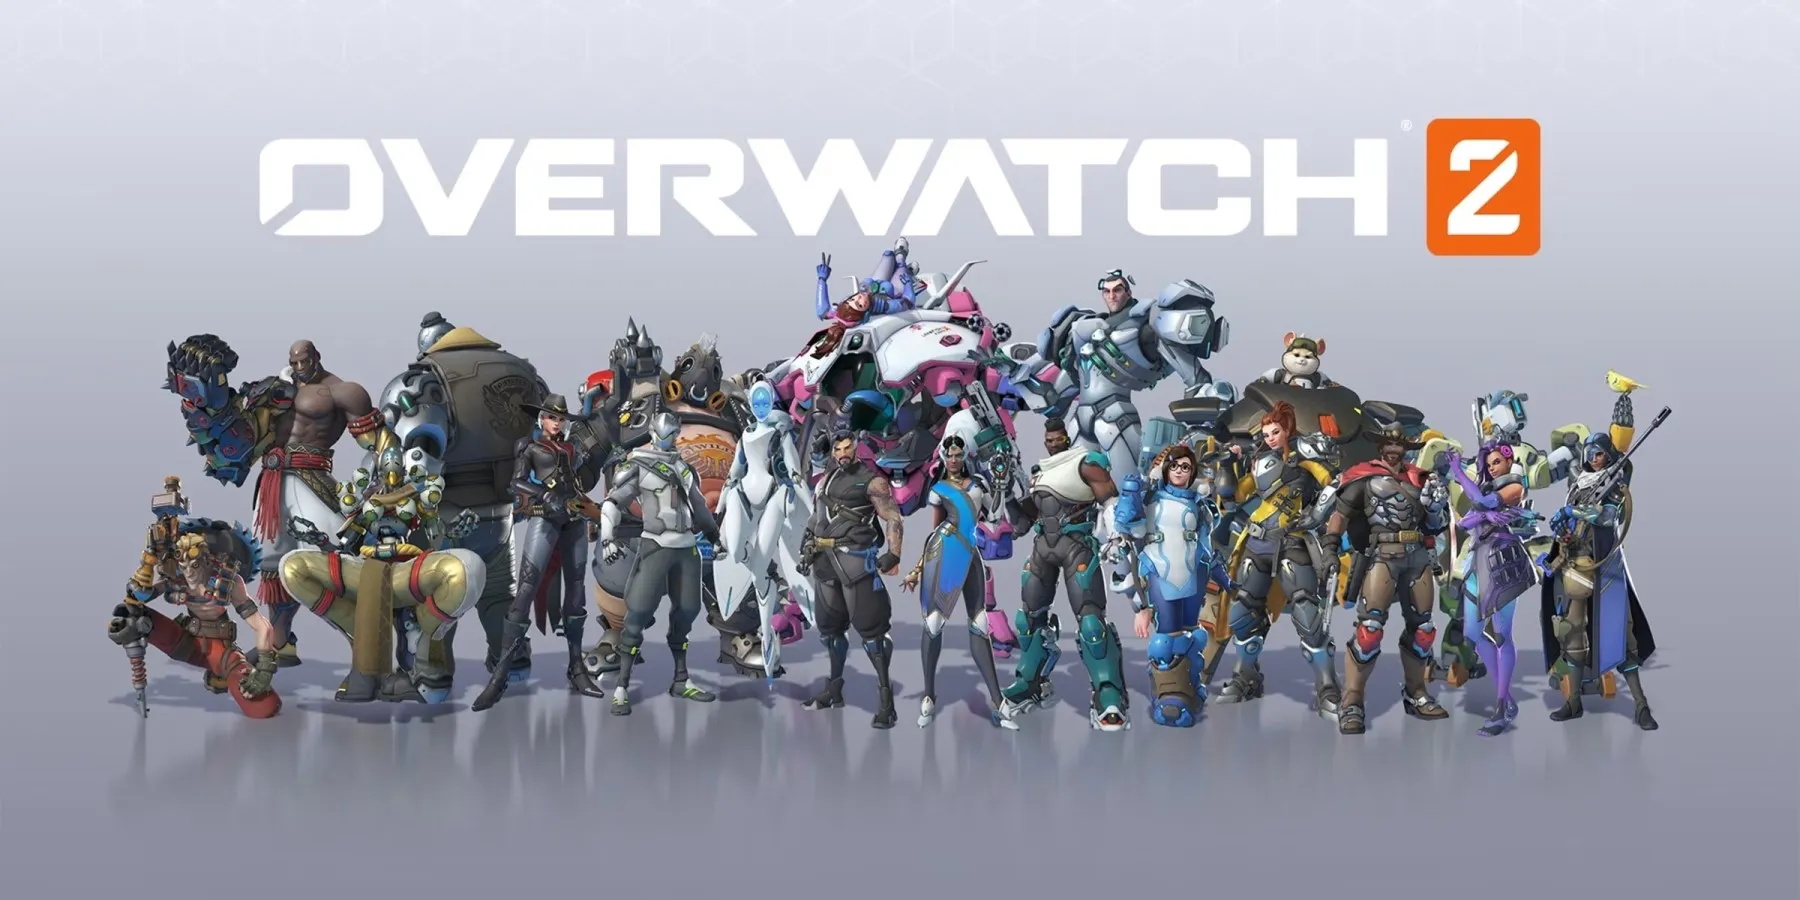 heroes of overwatch 2 posing under the game’s logo